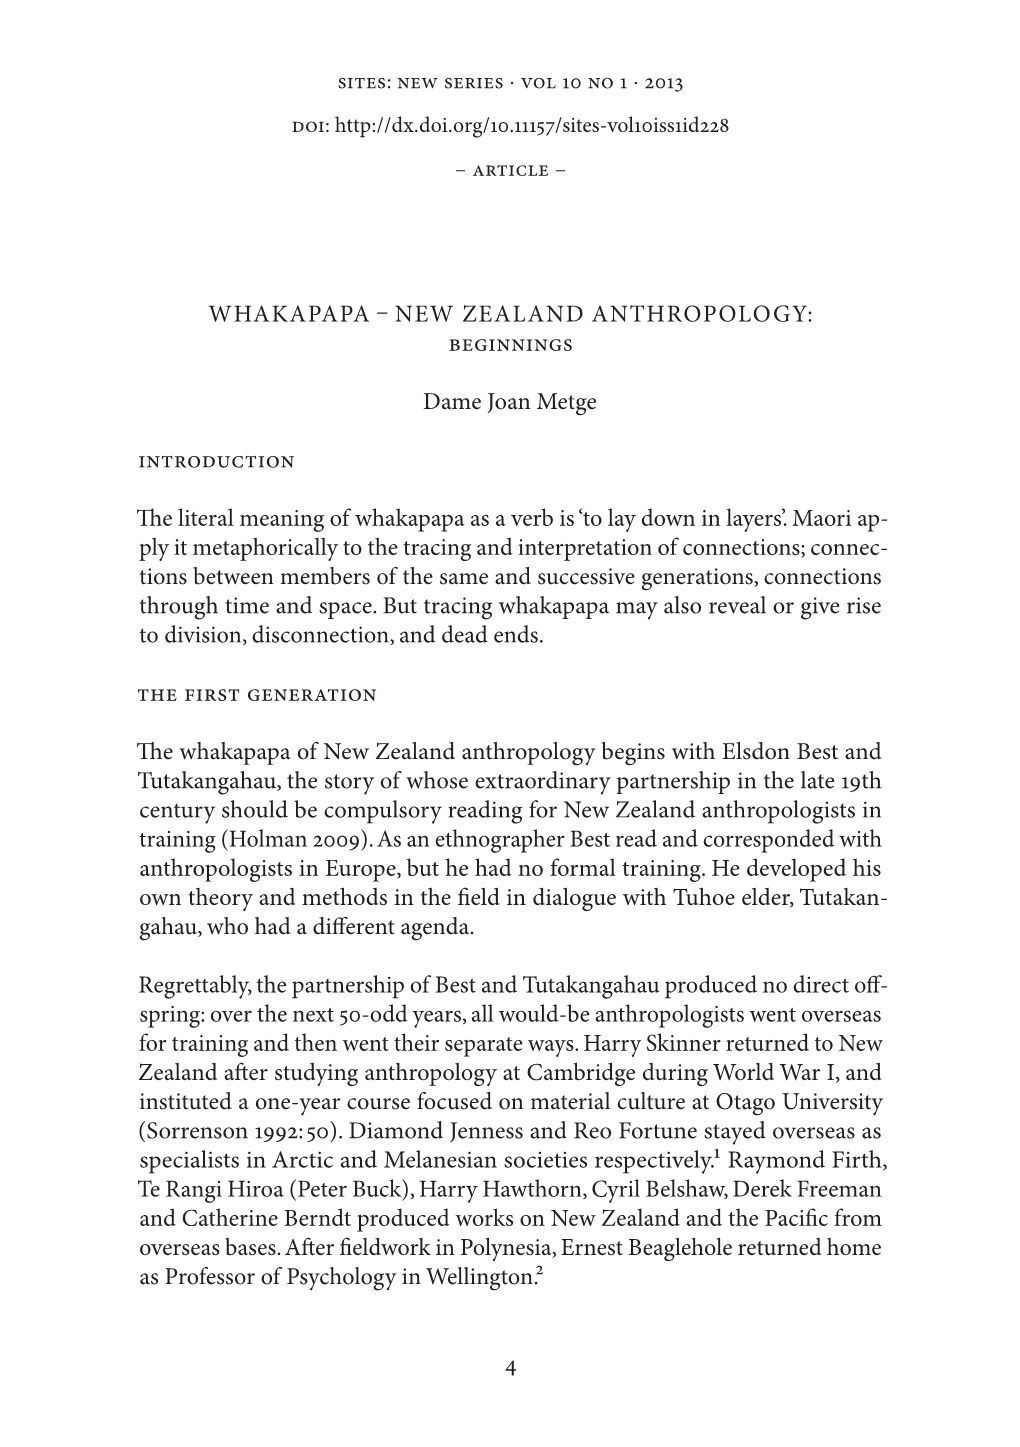 BEGINNINGS Dame Joan Metge INTRODUCTION the Literal Meaning of Whakapapa As a Verb Is